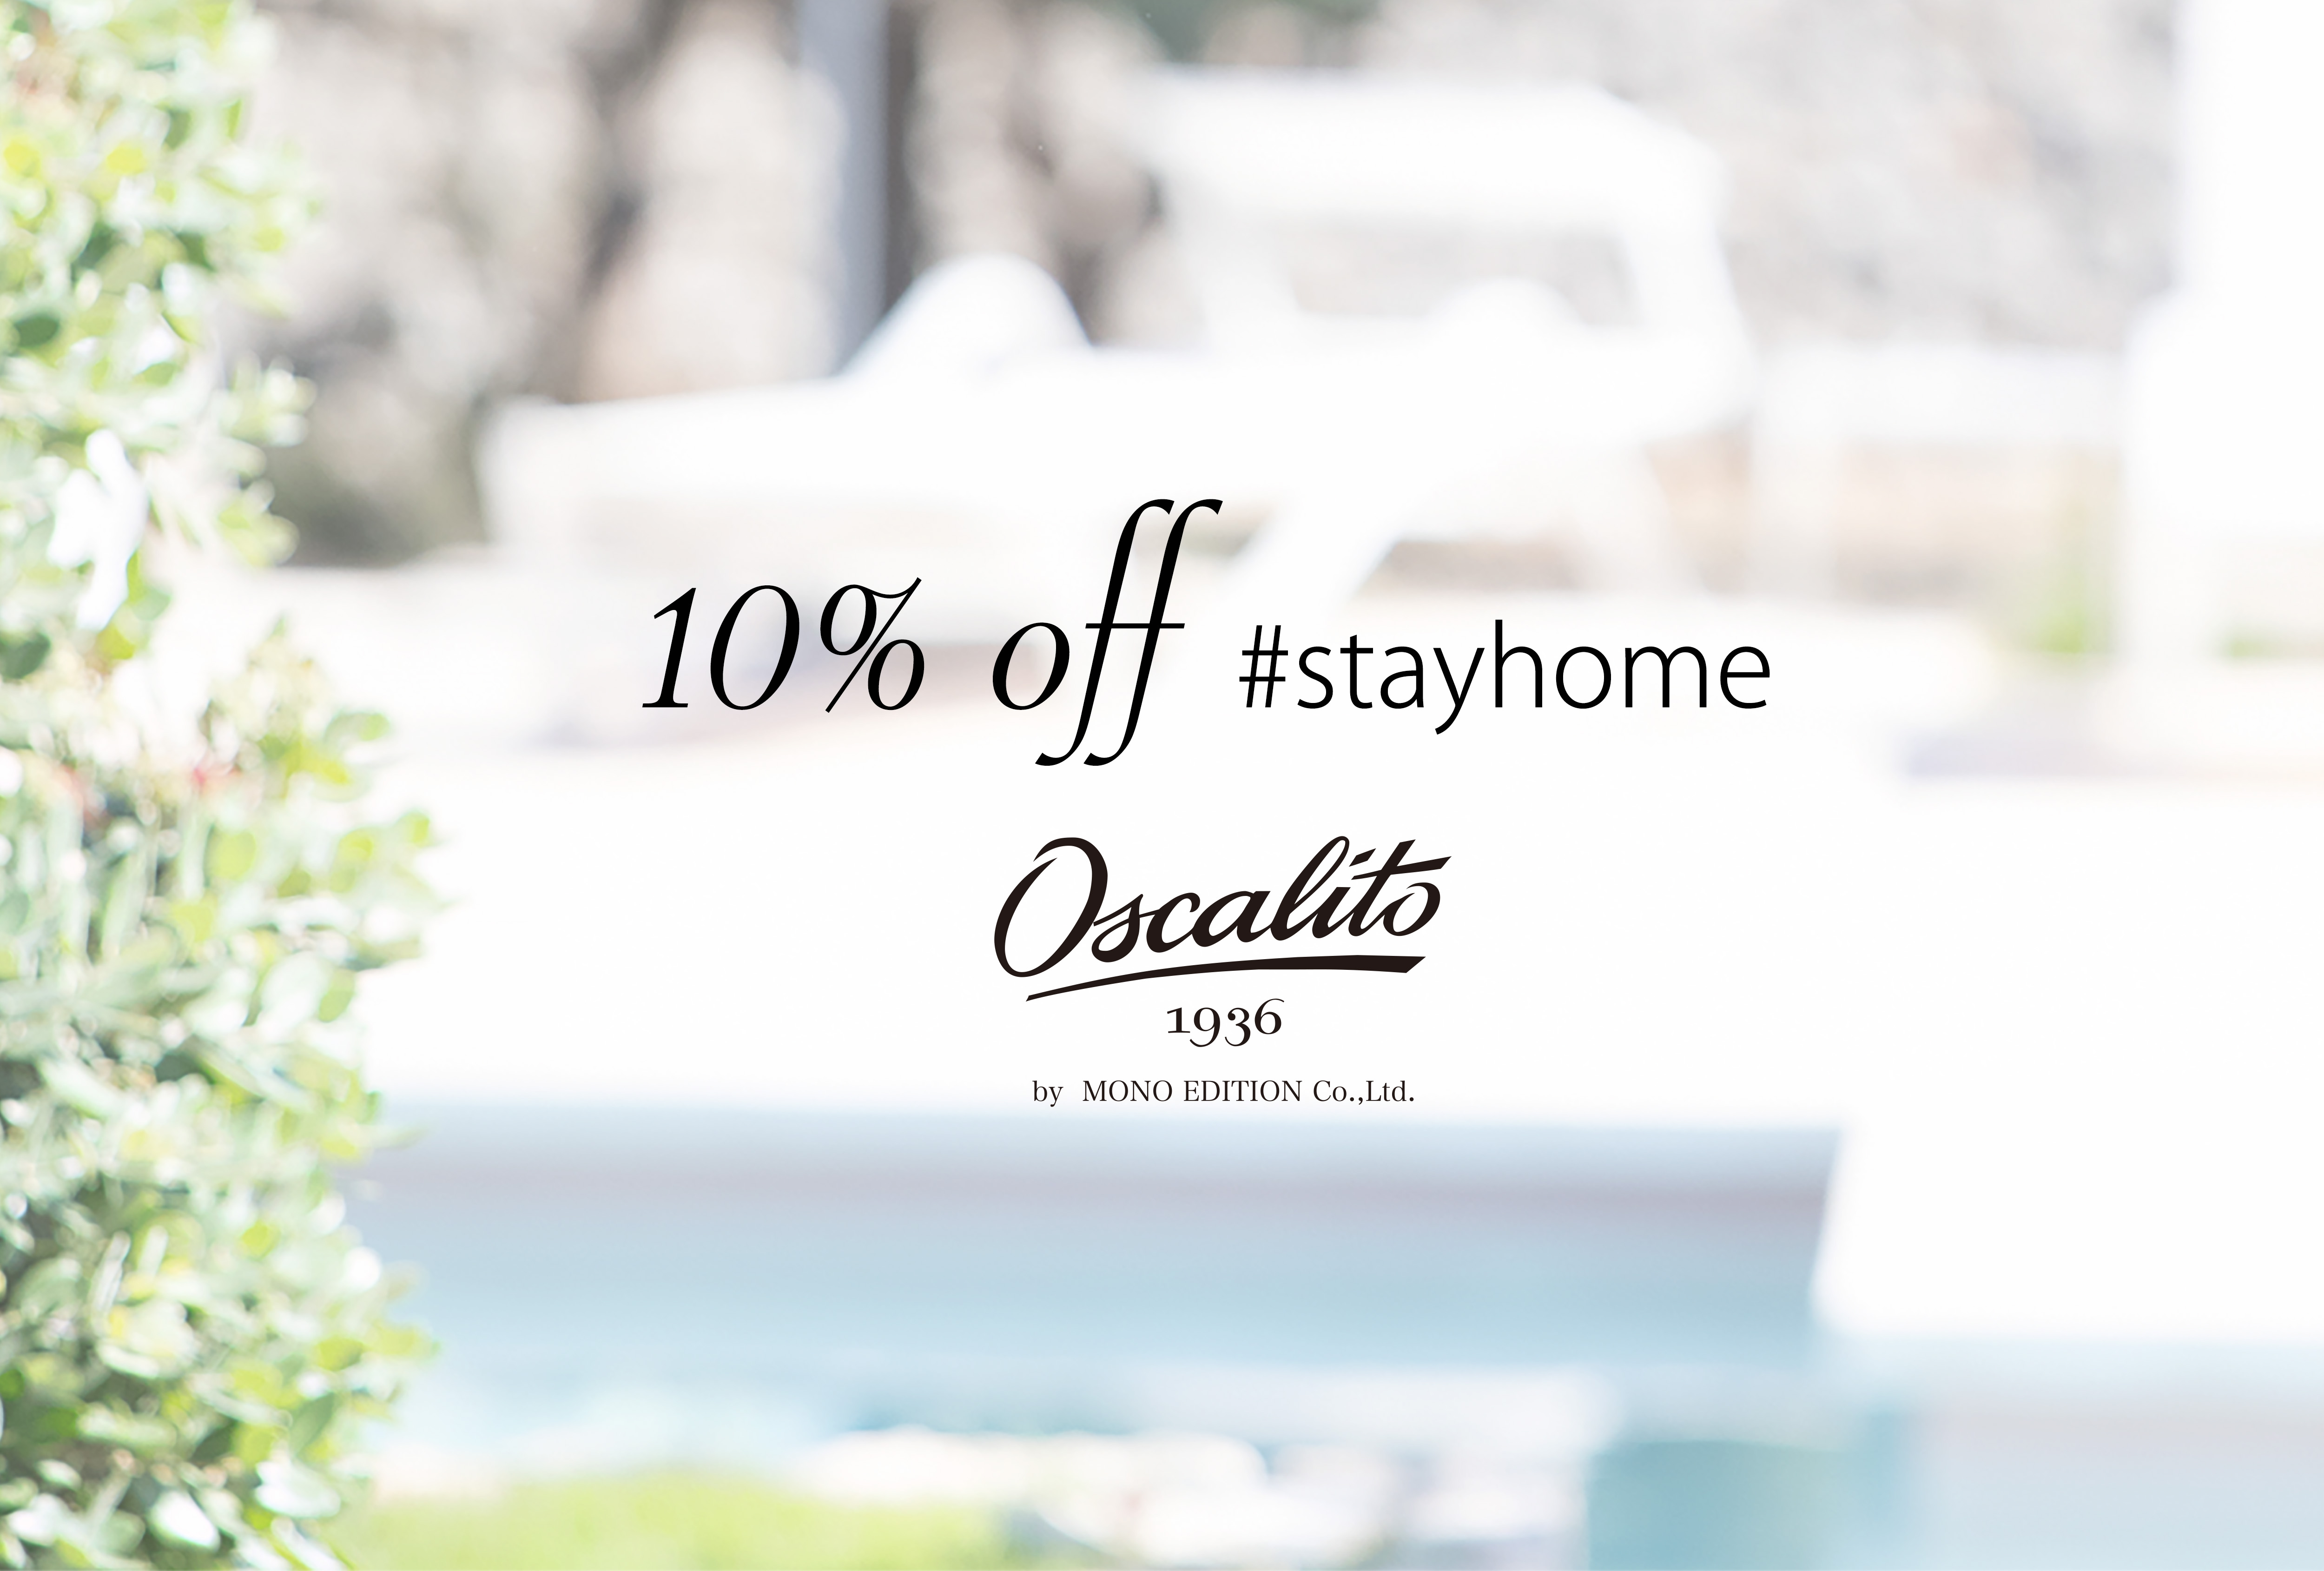 #stayhome 10% OFF!